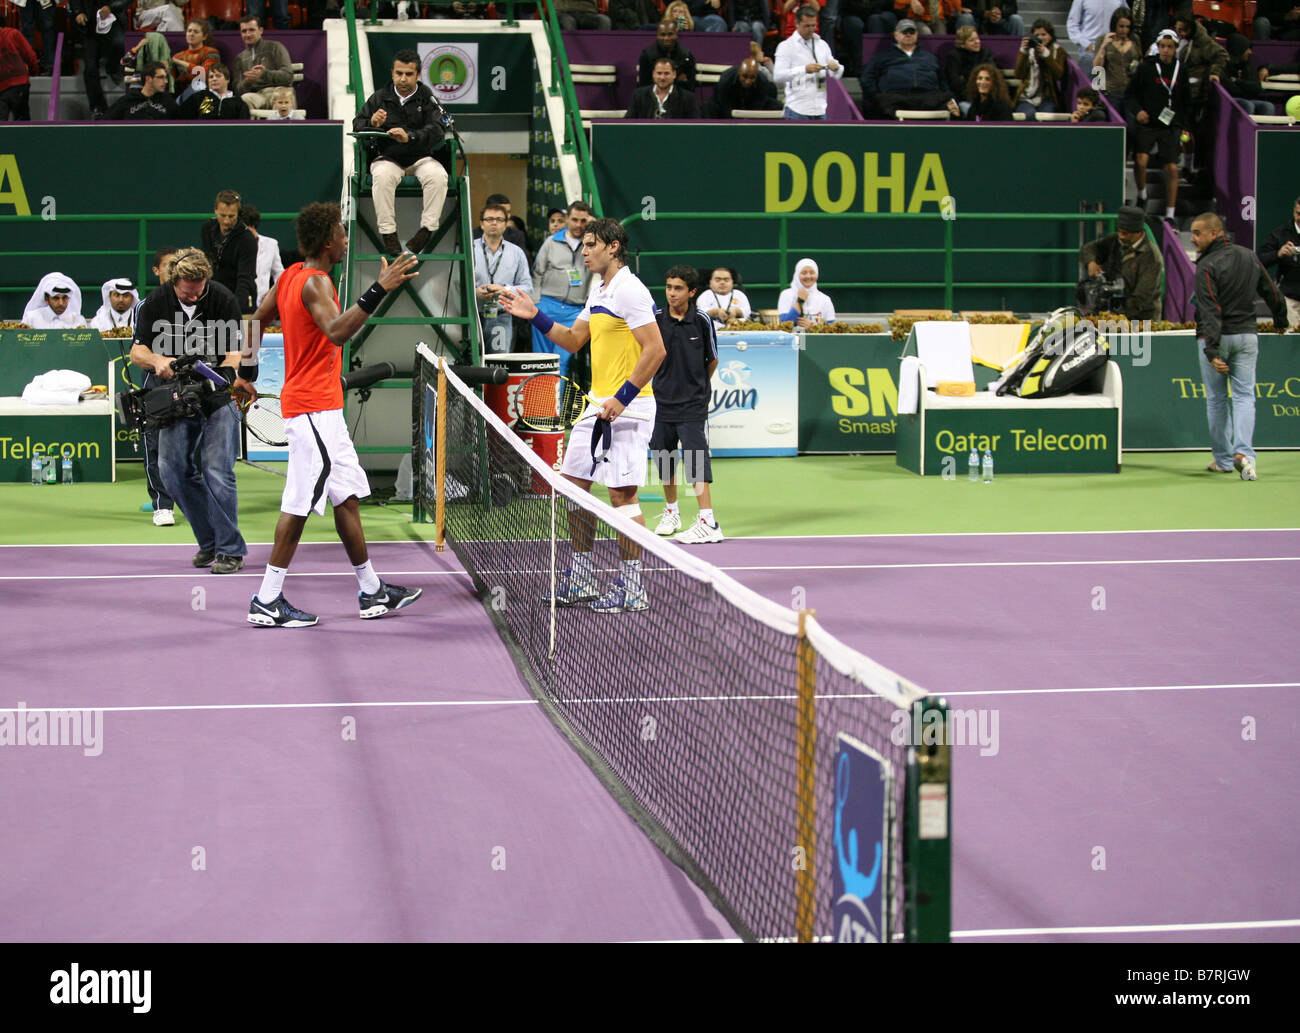 Gael Monfils and world No 1 Rafael Nadal shake hands at the net after Monfils inflicted won their match at the Qatar Open 2009 Stock Photo